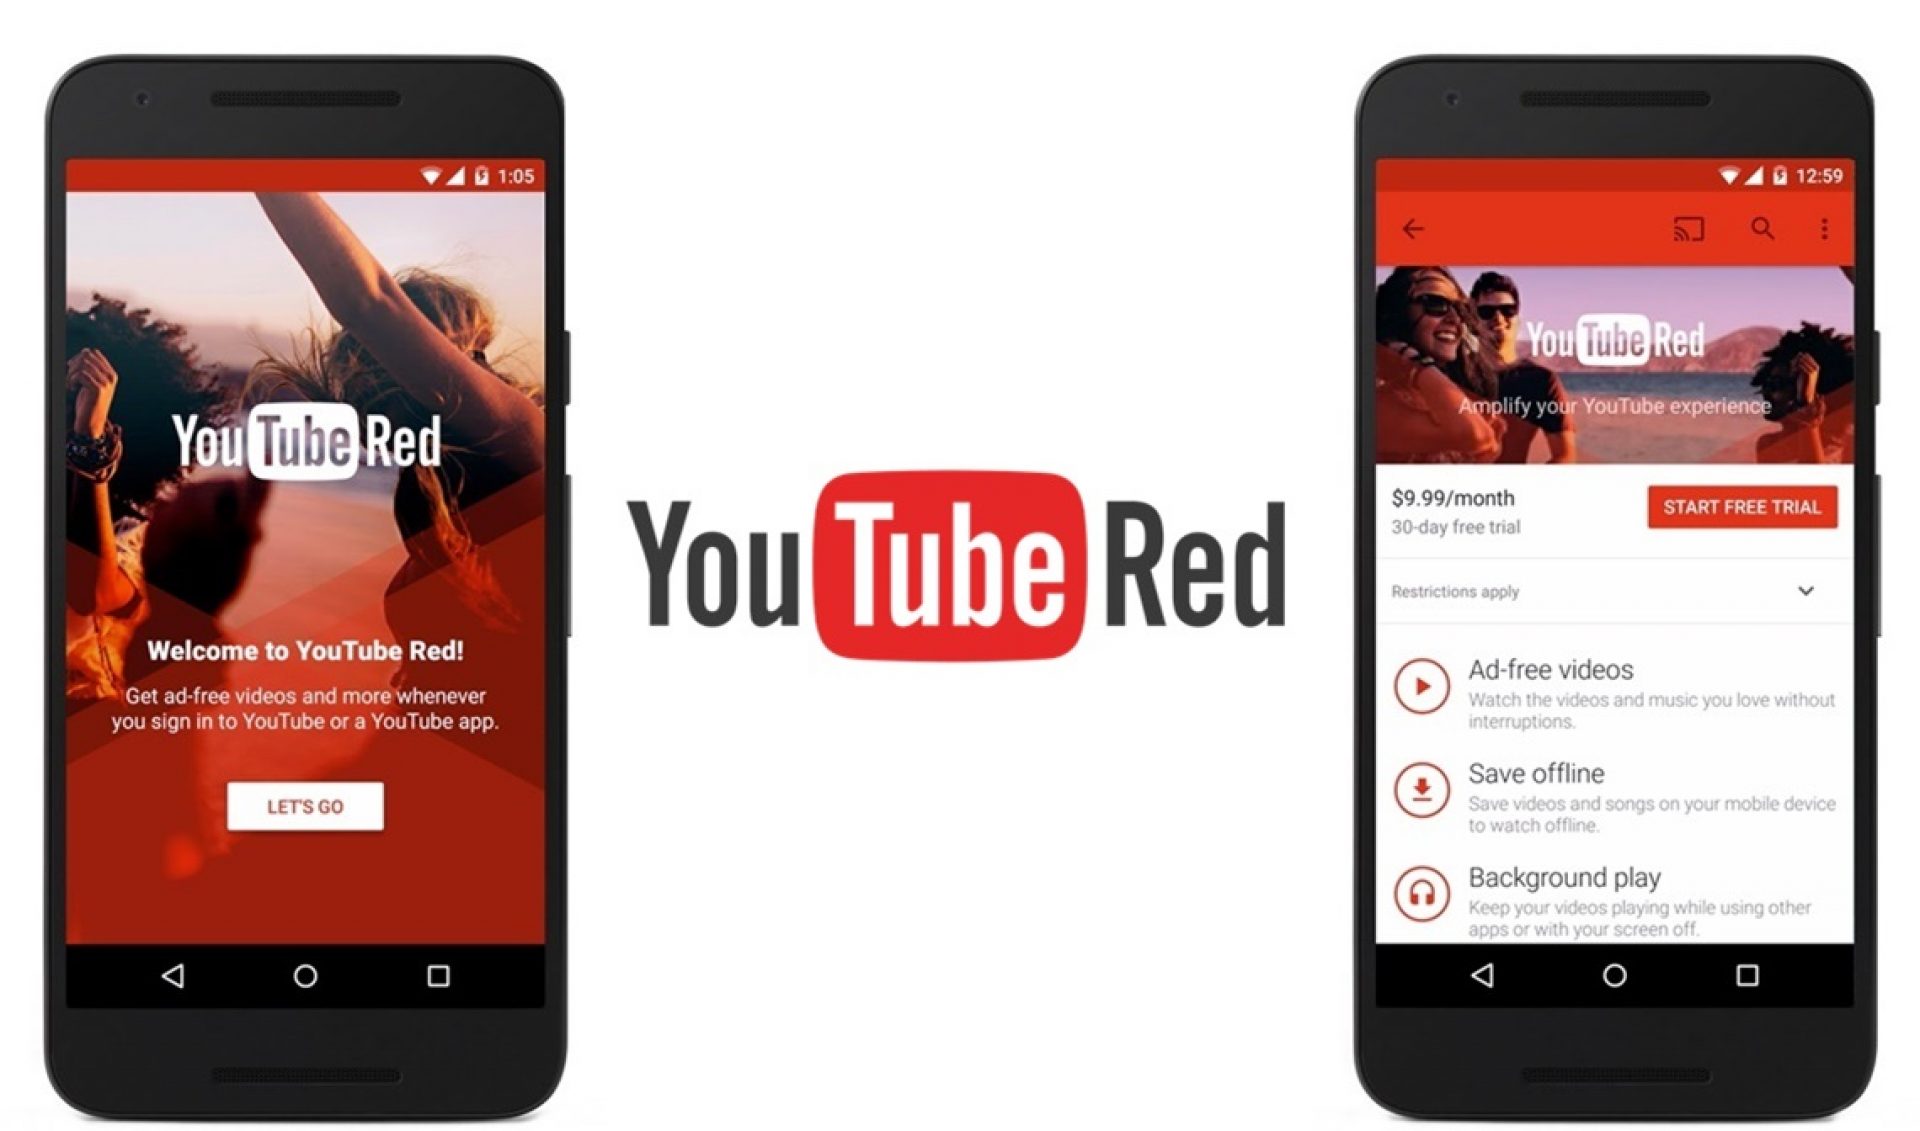 YouTube Officially Announces YouTube Red, Its Paid Subscription Service With Originals From Its Stars